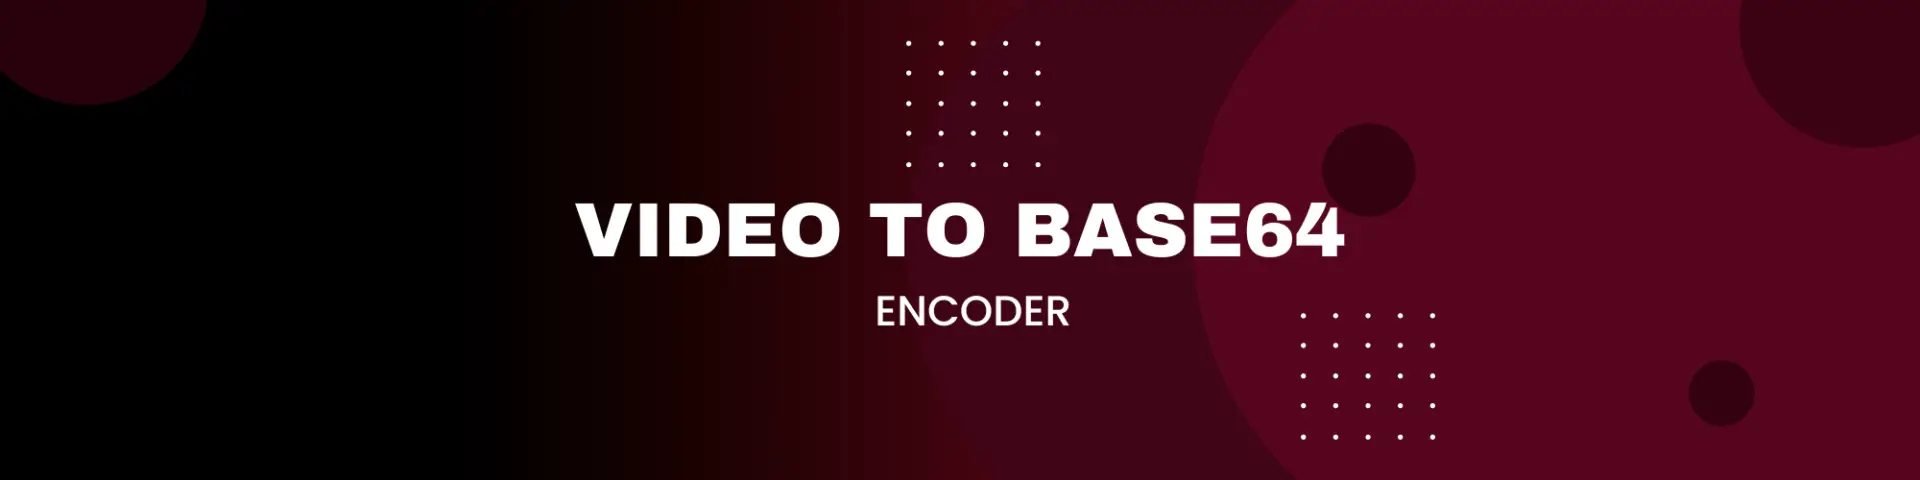 Video to Base64 Encoder: Convert Video to Base64